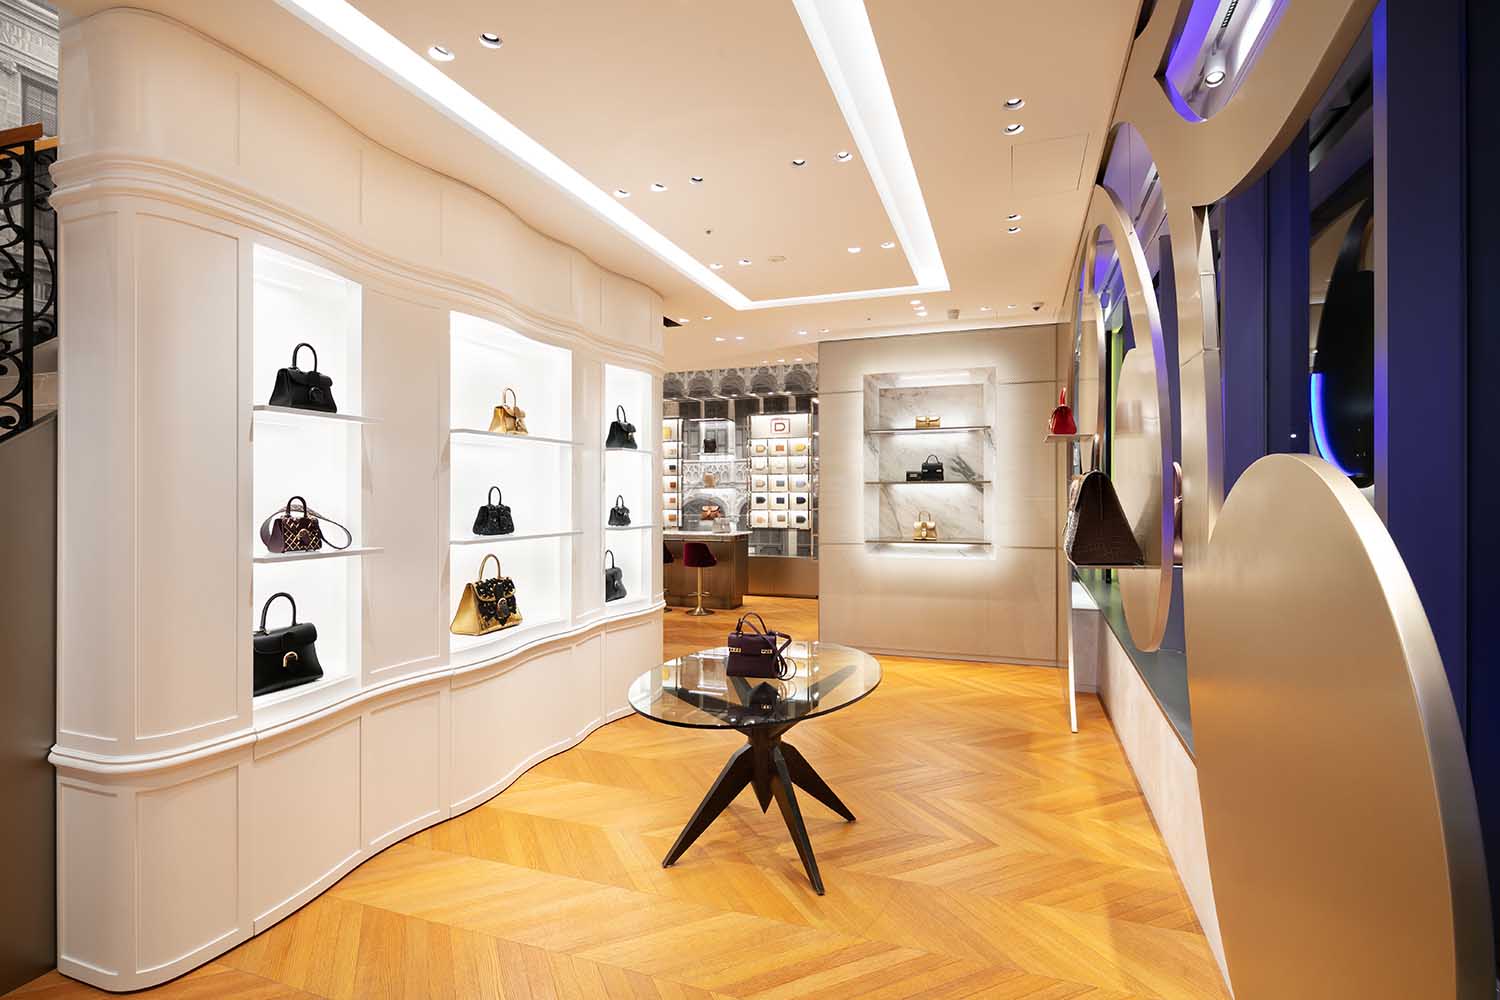 THE NEW DELVAUX FLAGSHIP STORE IN TOKYO BY VUDAFIERI-SAVERINO